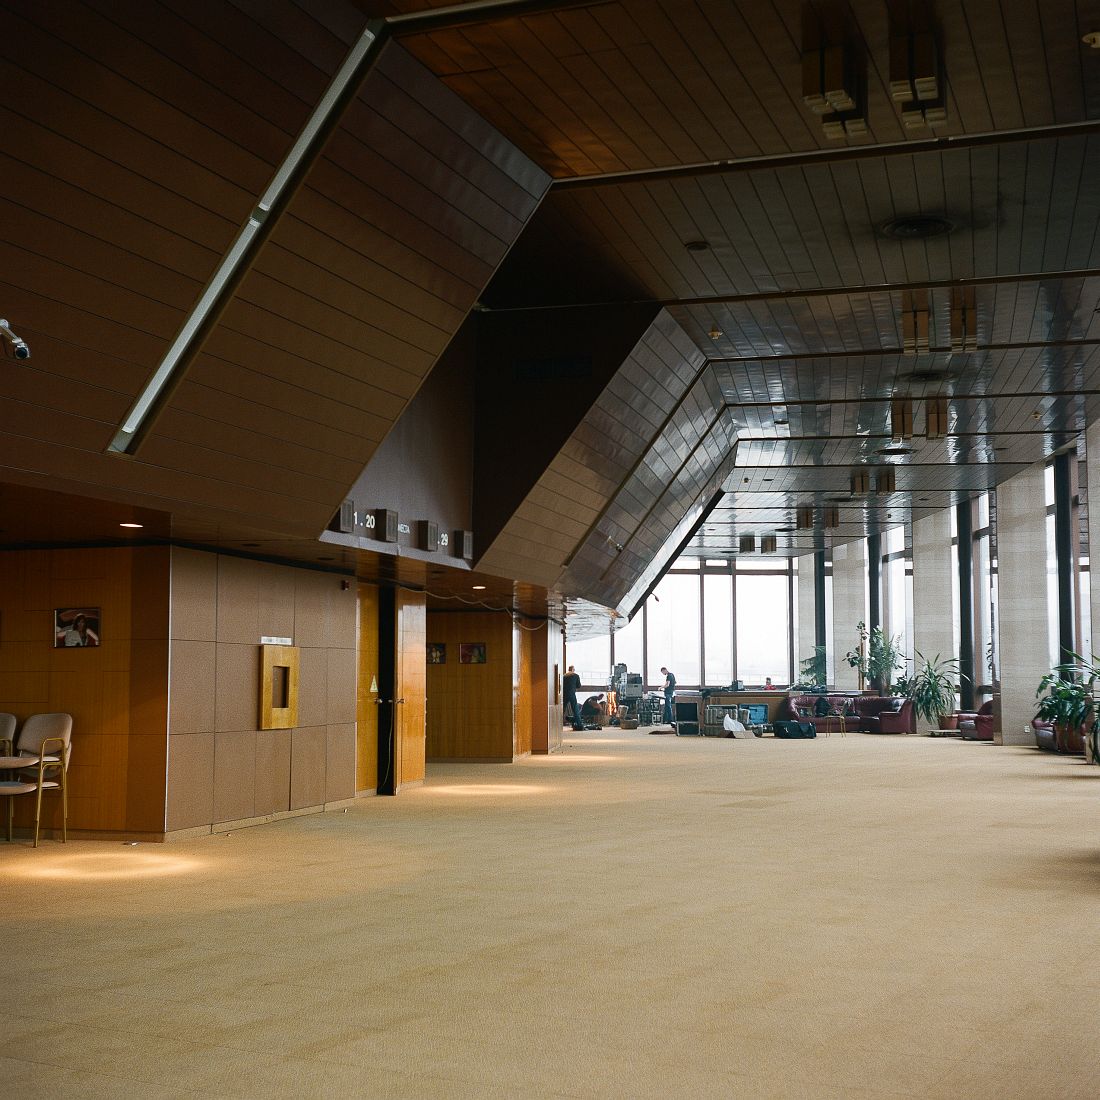 Interior of main hall at Cosmos Hotel. The hotel was completed in 1979 as the main facility for tourists and also hosted one of the Olympic press-centres.